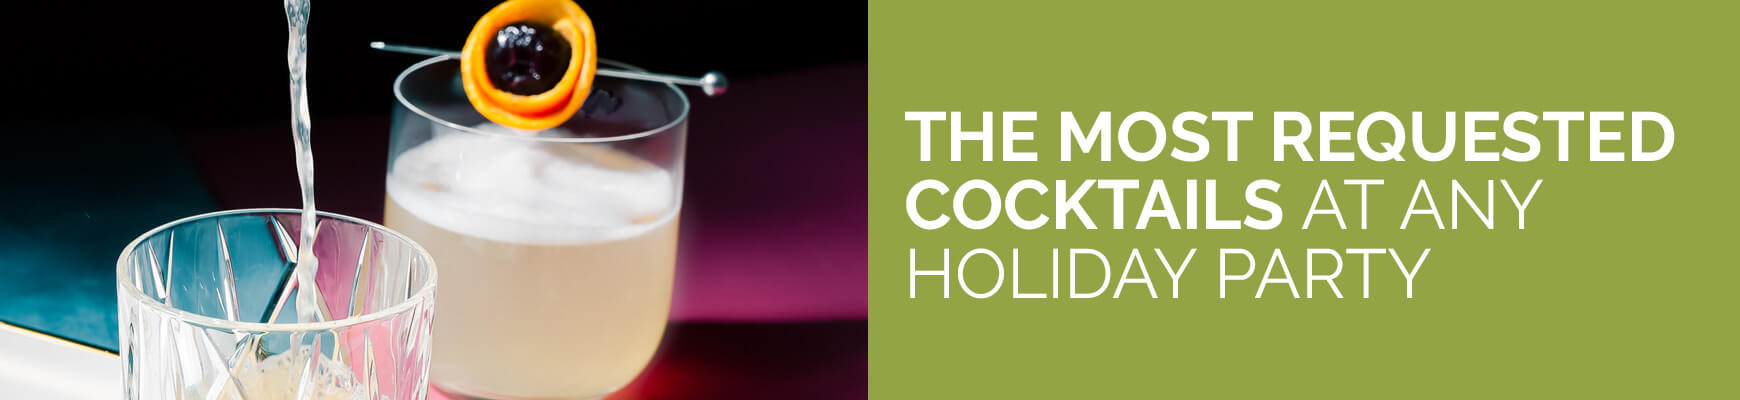 The Most Requested Cocktails at Any Holiday Party